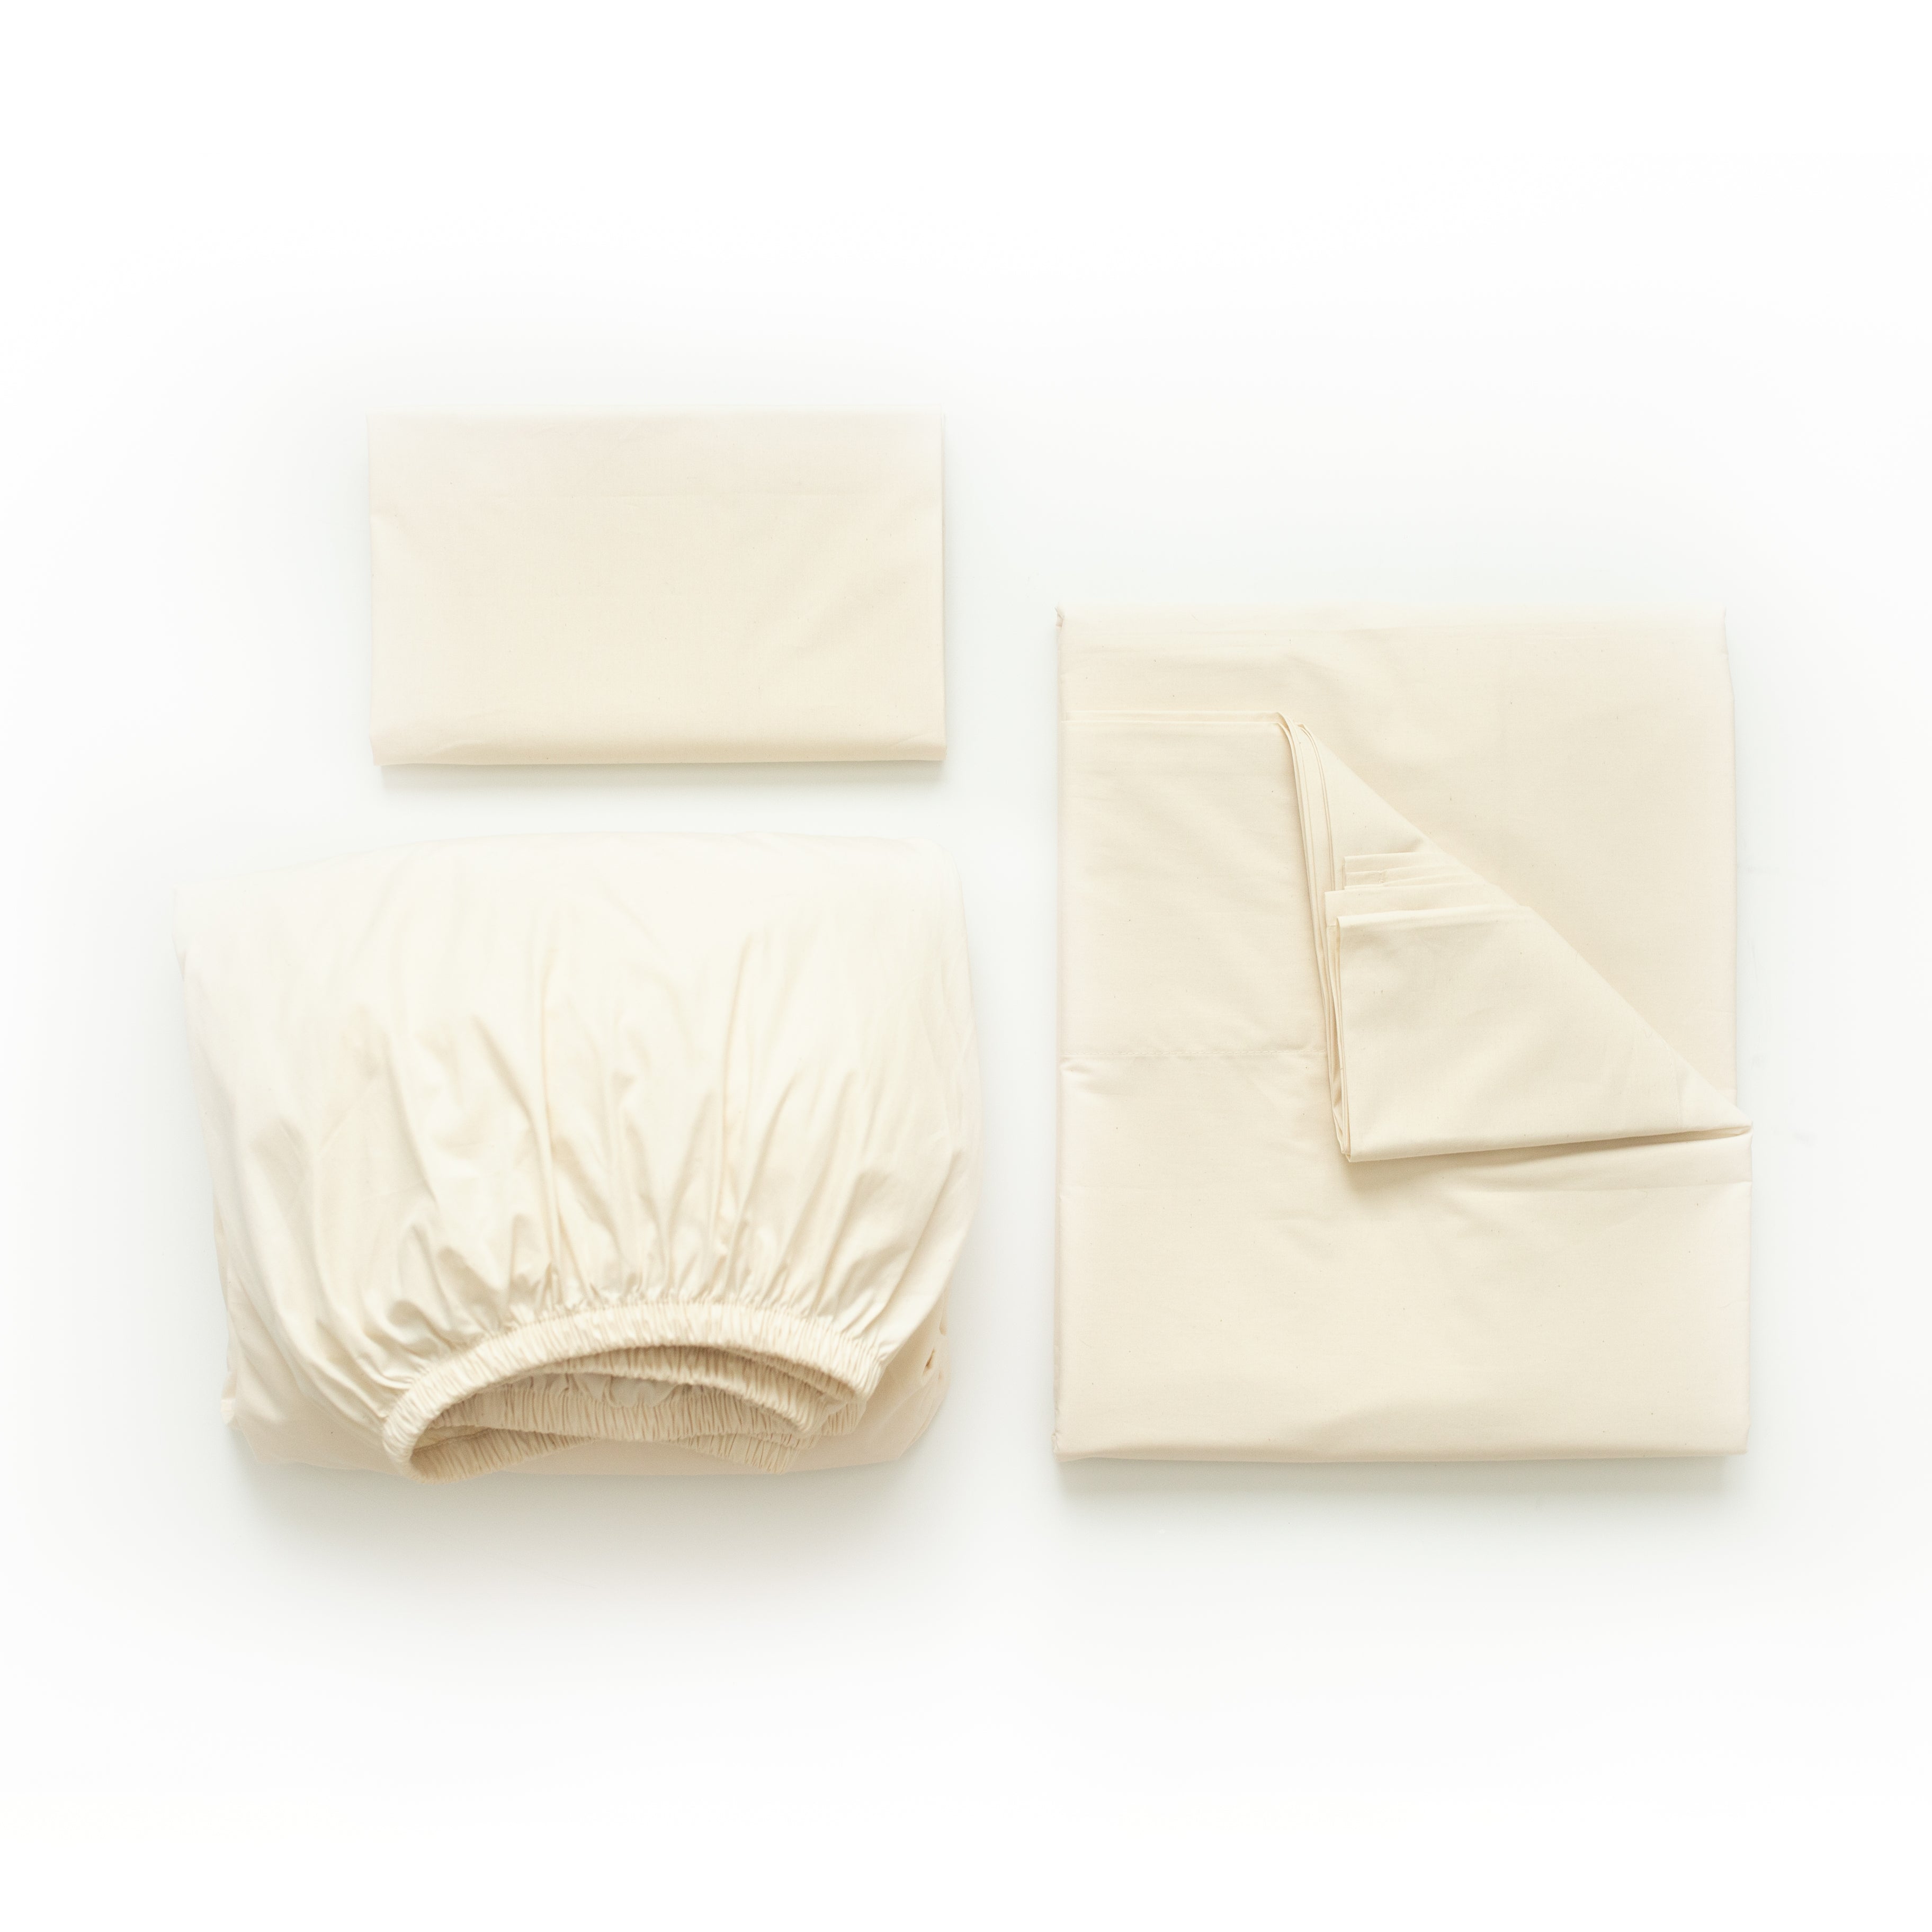 Oolie organic cotton pillowcases, flat sheet, and deep fitted sheet in natural, unbleached cotton, folded flat on a white background.